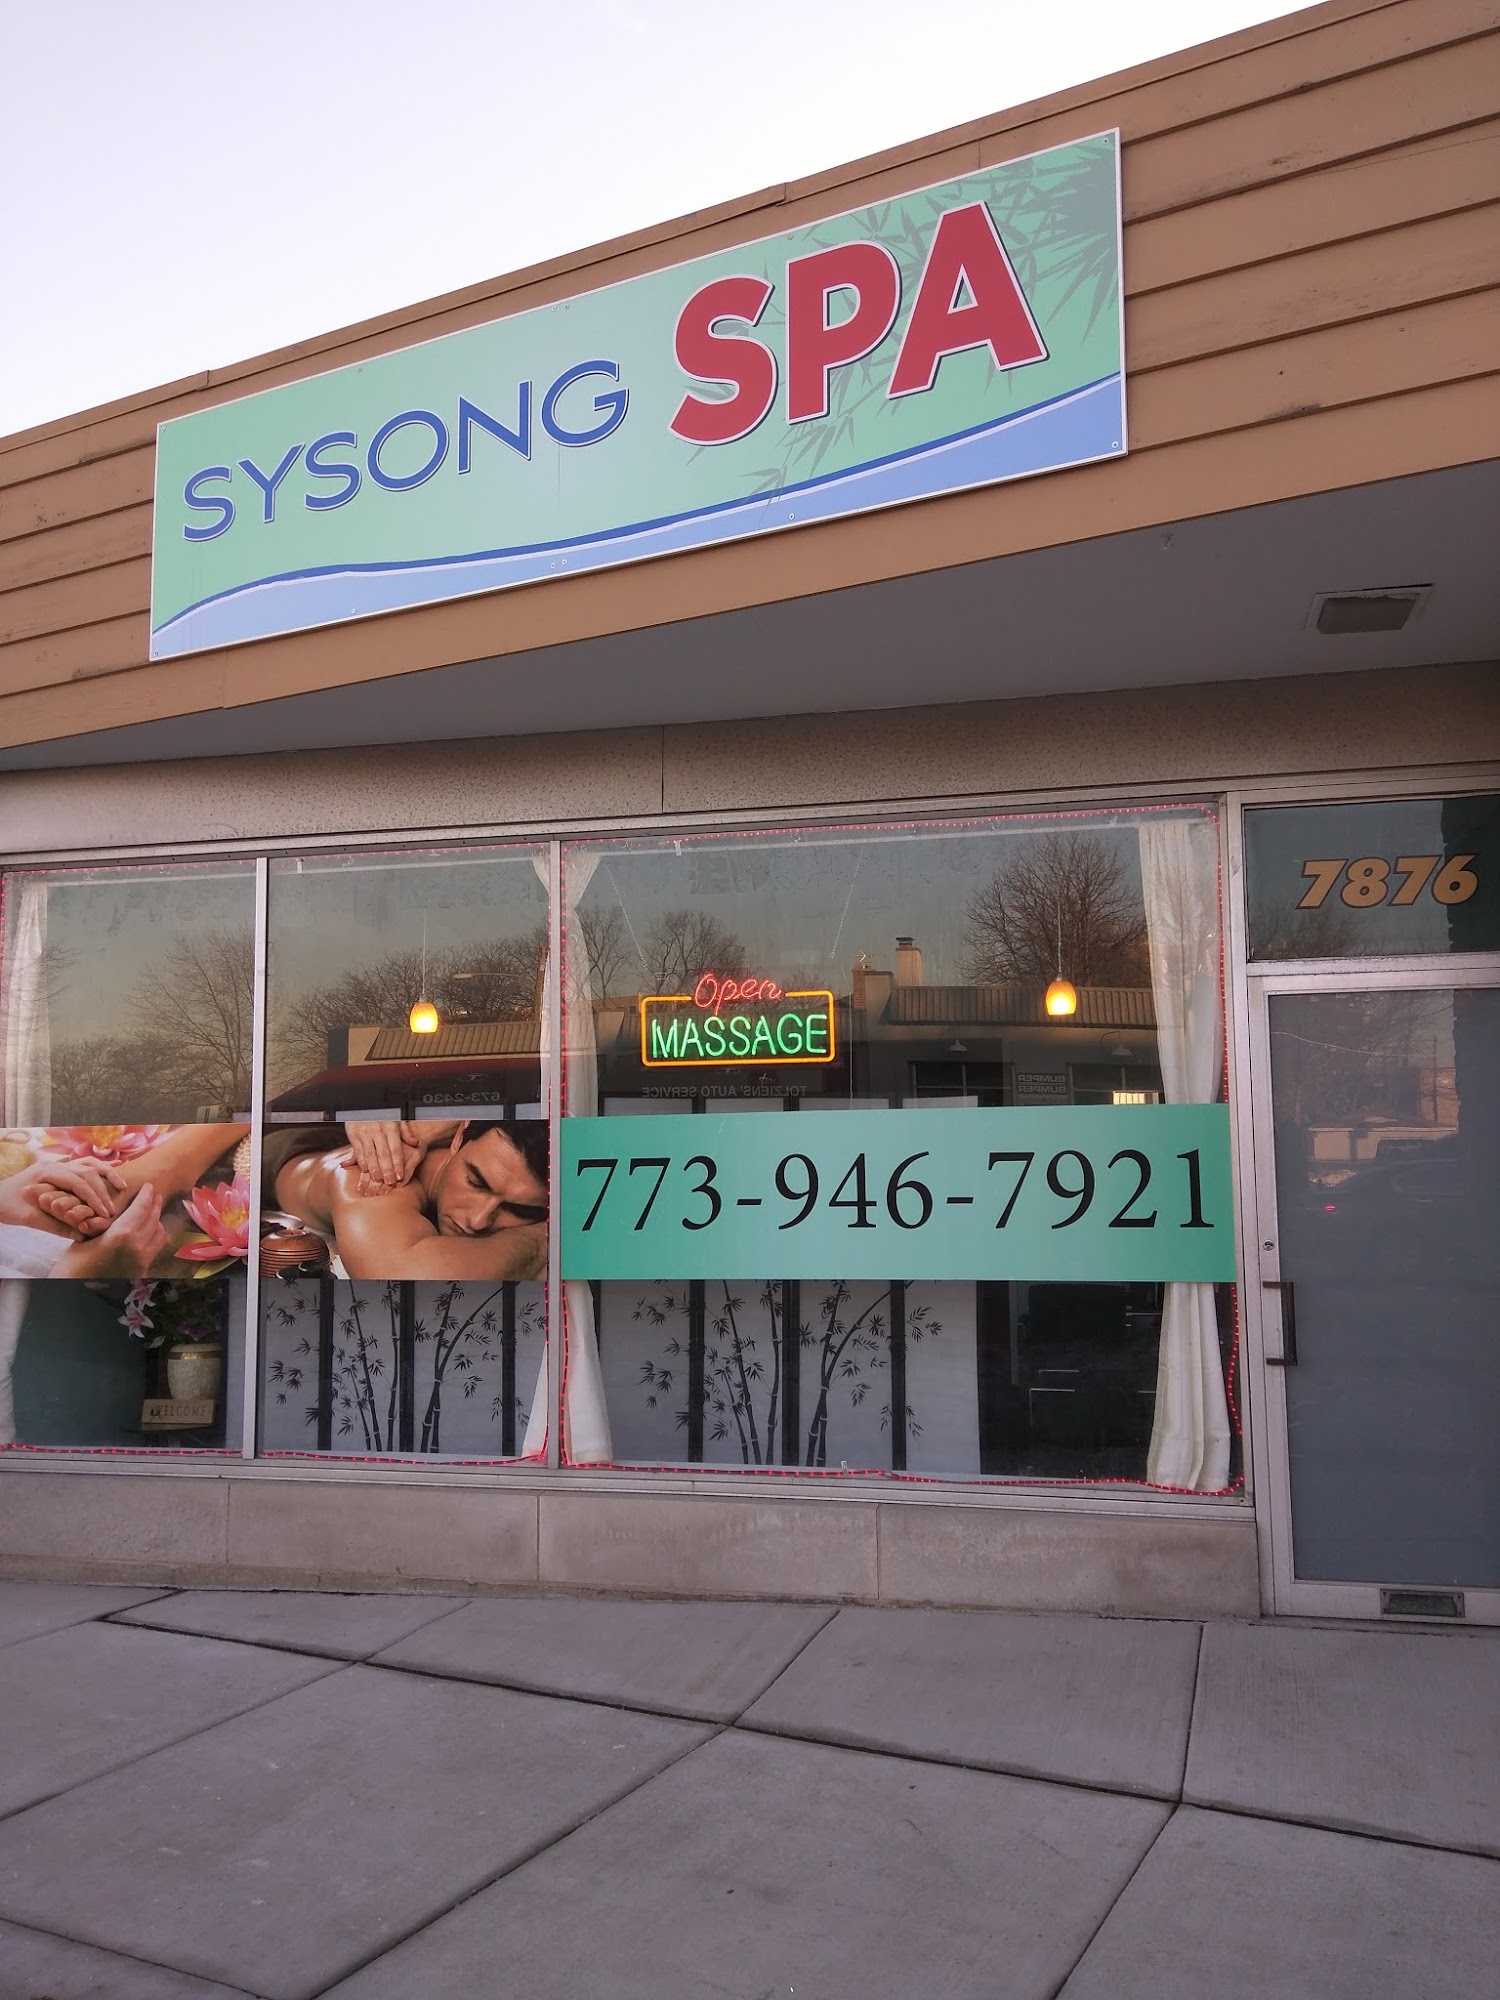 Sysong Spa